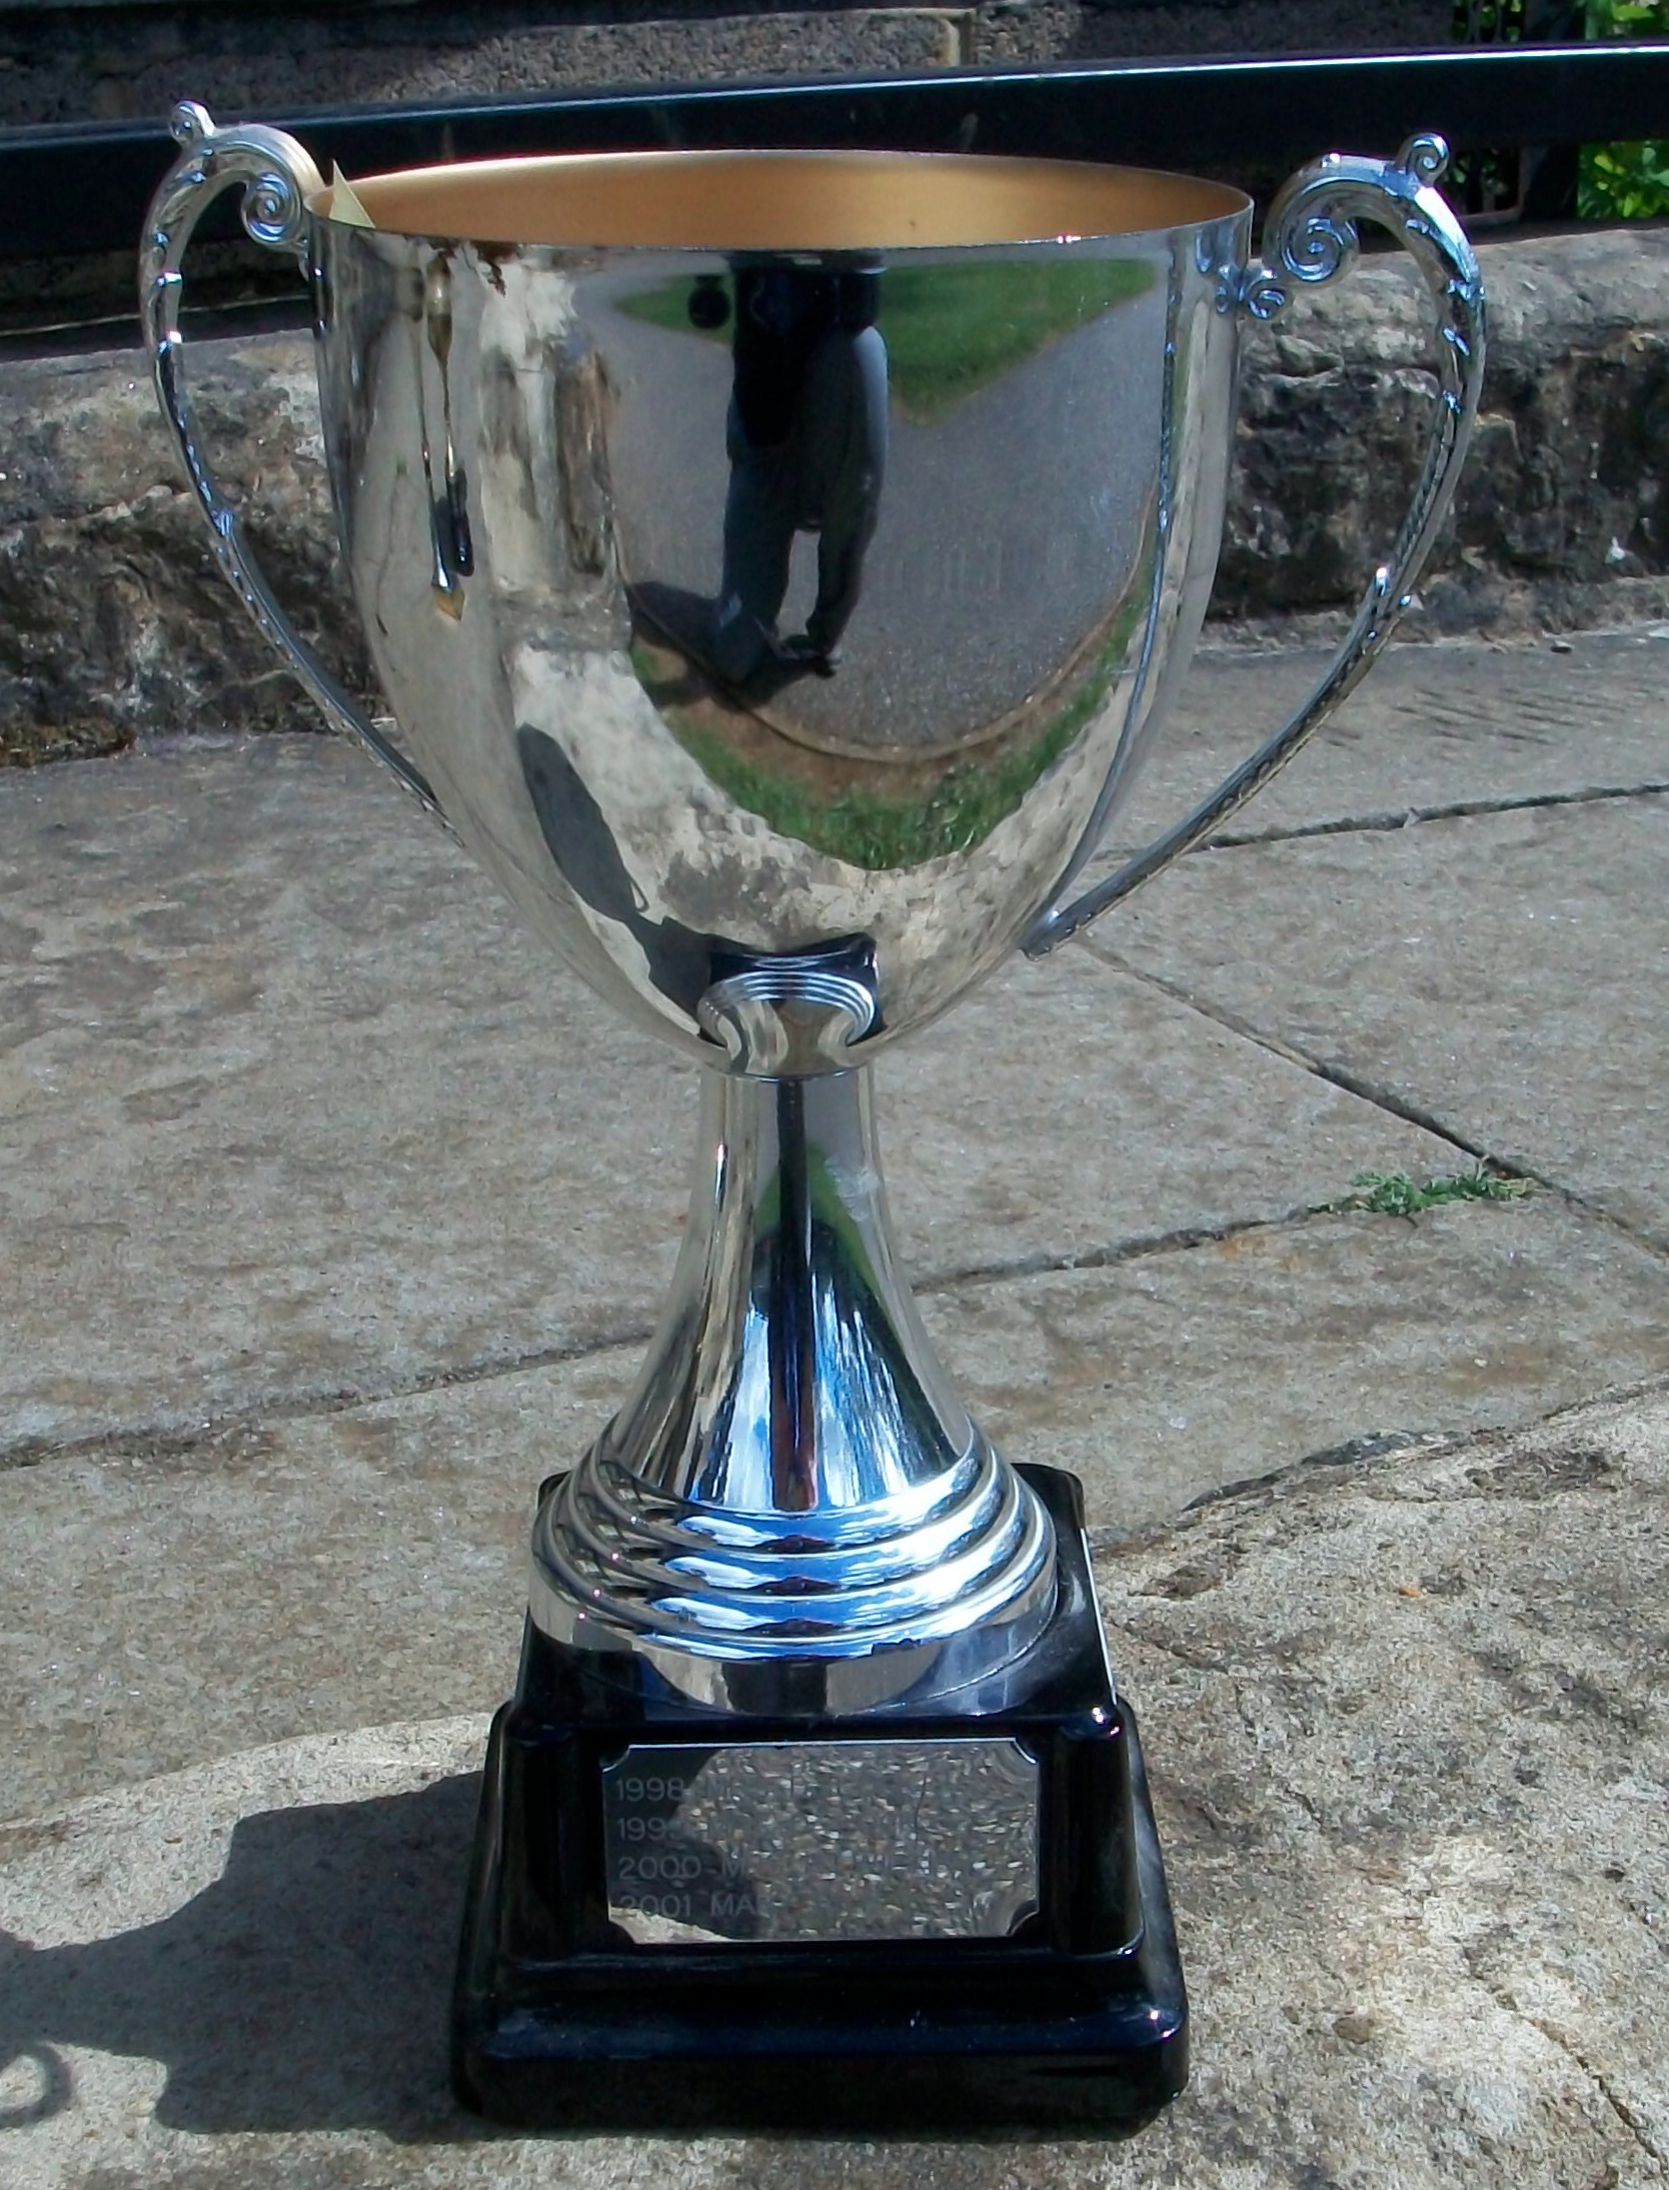 The Radford Cup